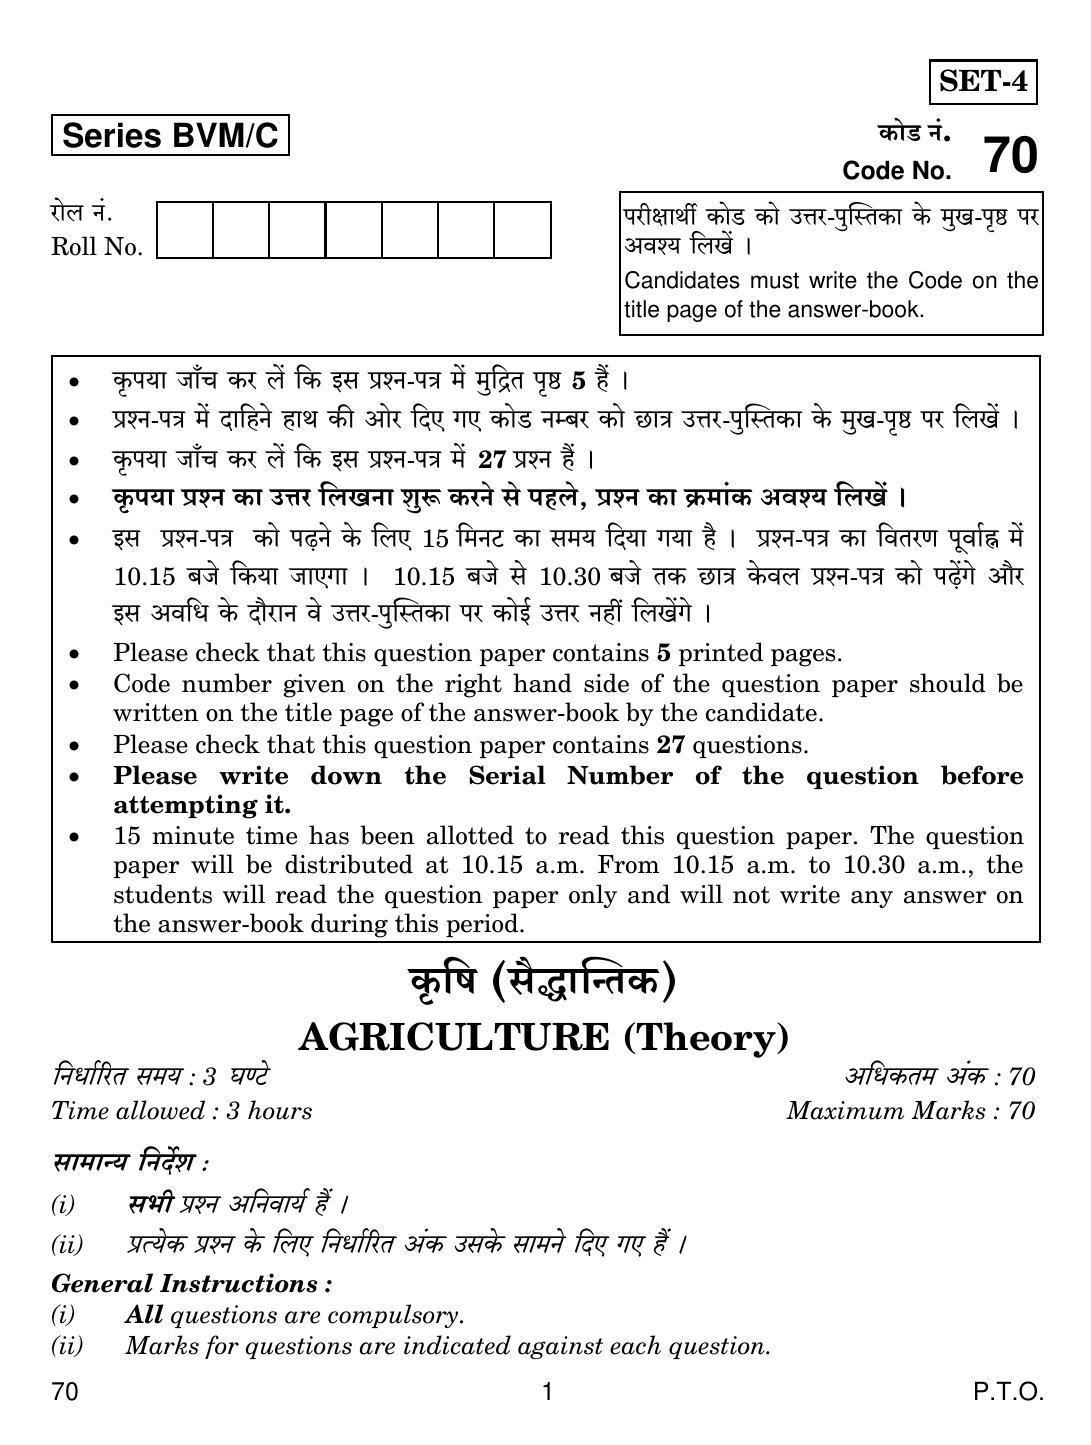 CBSE Class 12 70 AGRICULTURE 2019 Compartment Question Paper - Page 1